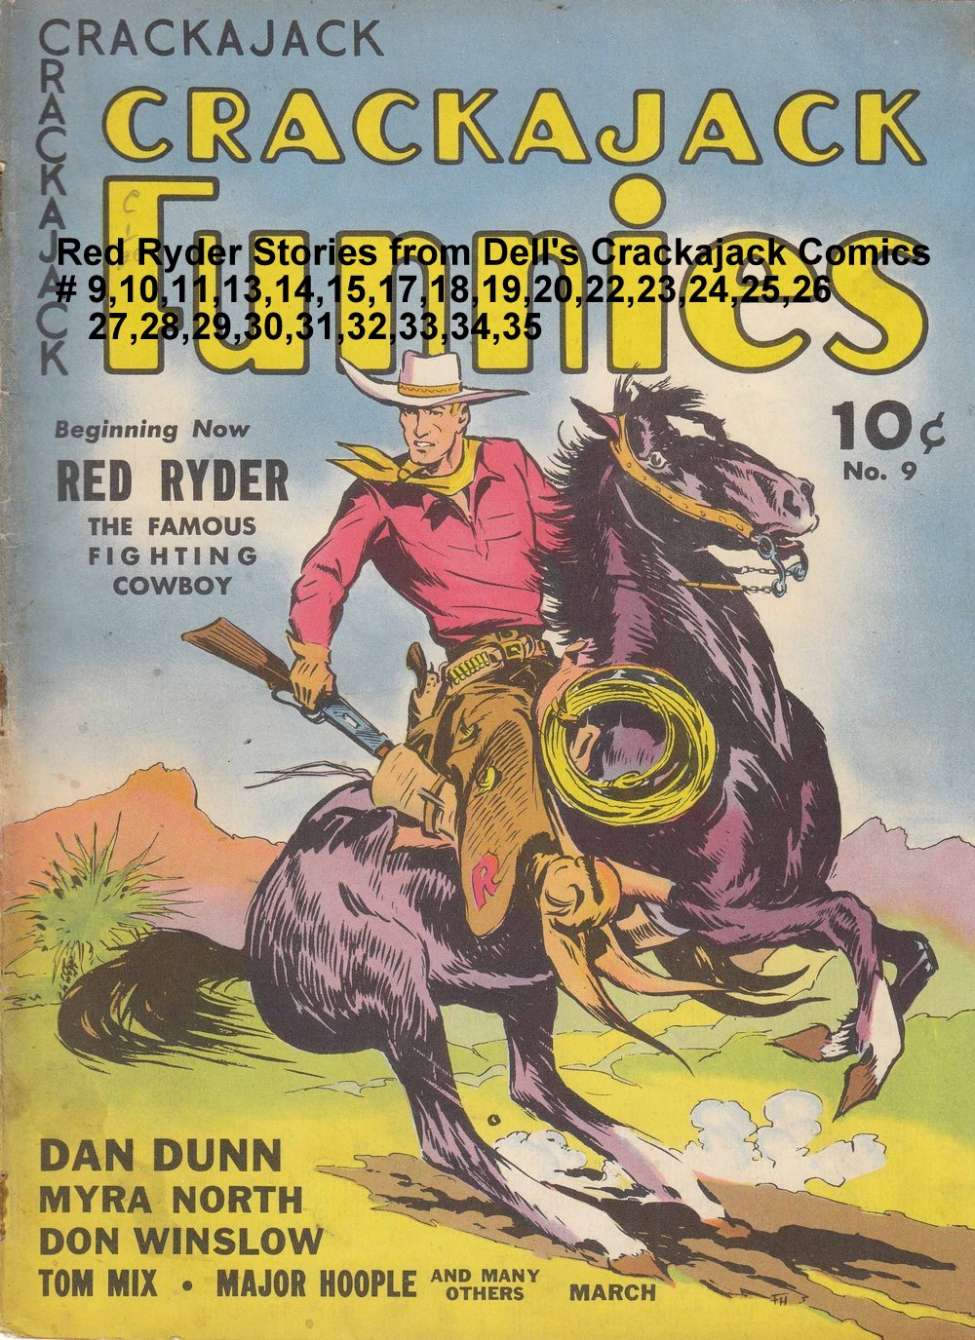 Comic Book Cover For Red Ryder from Dell's Crackajack Comics (1939-41)